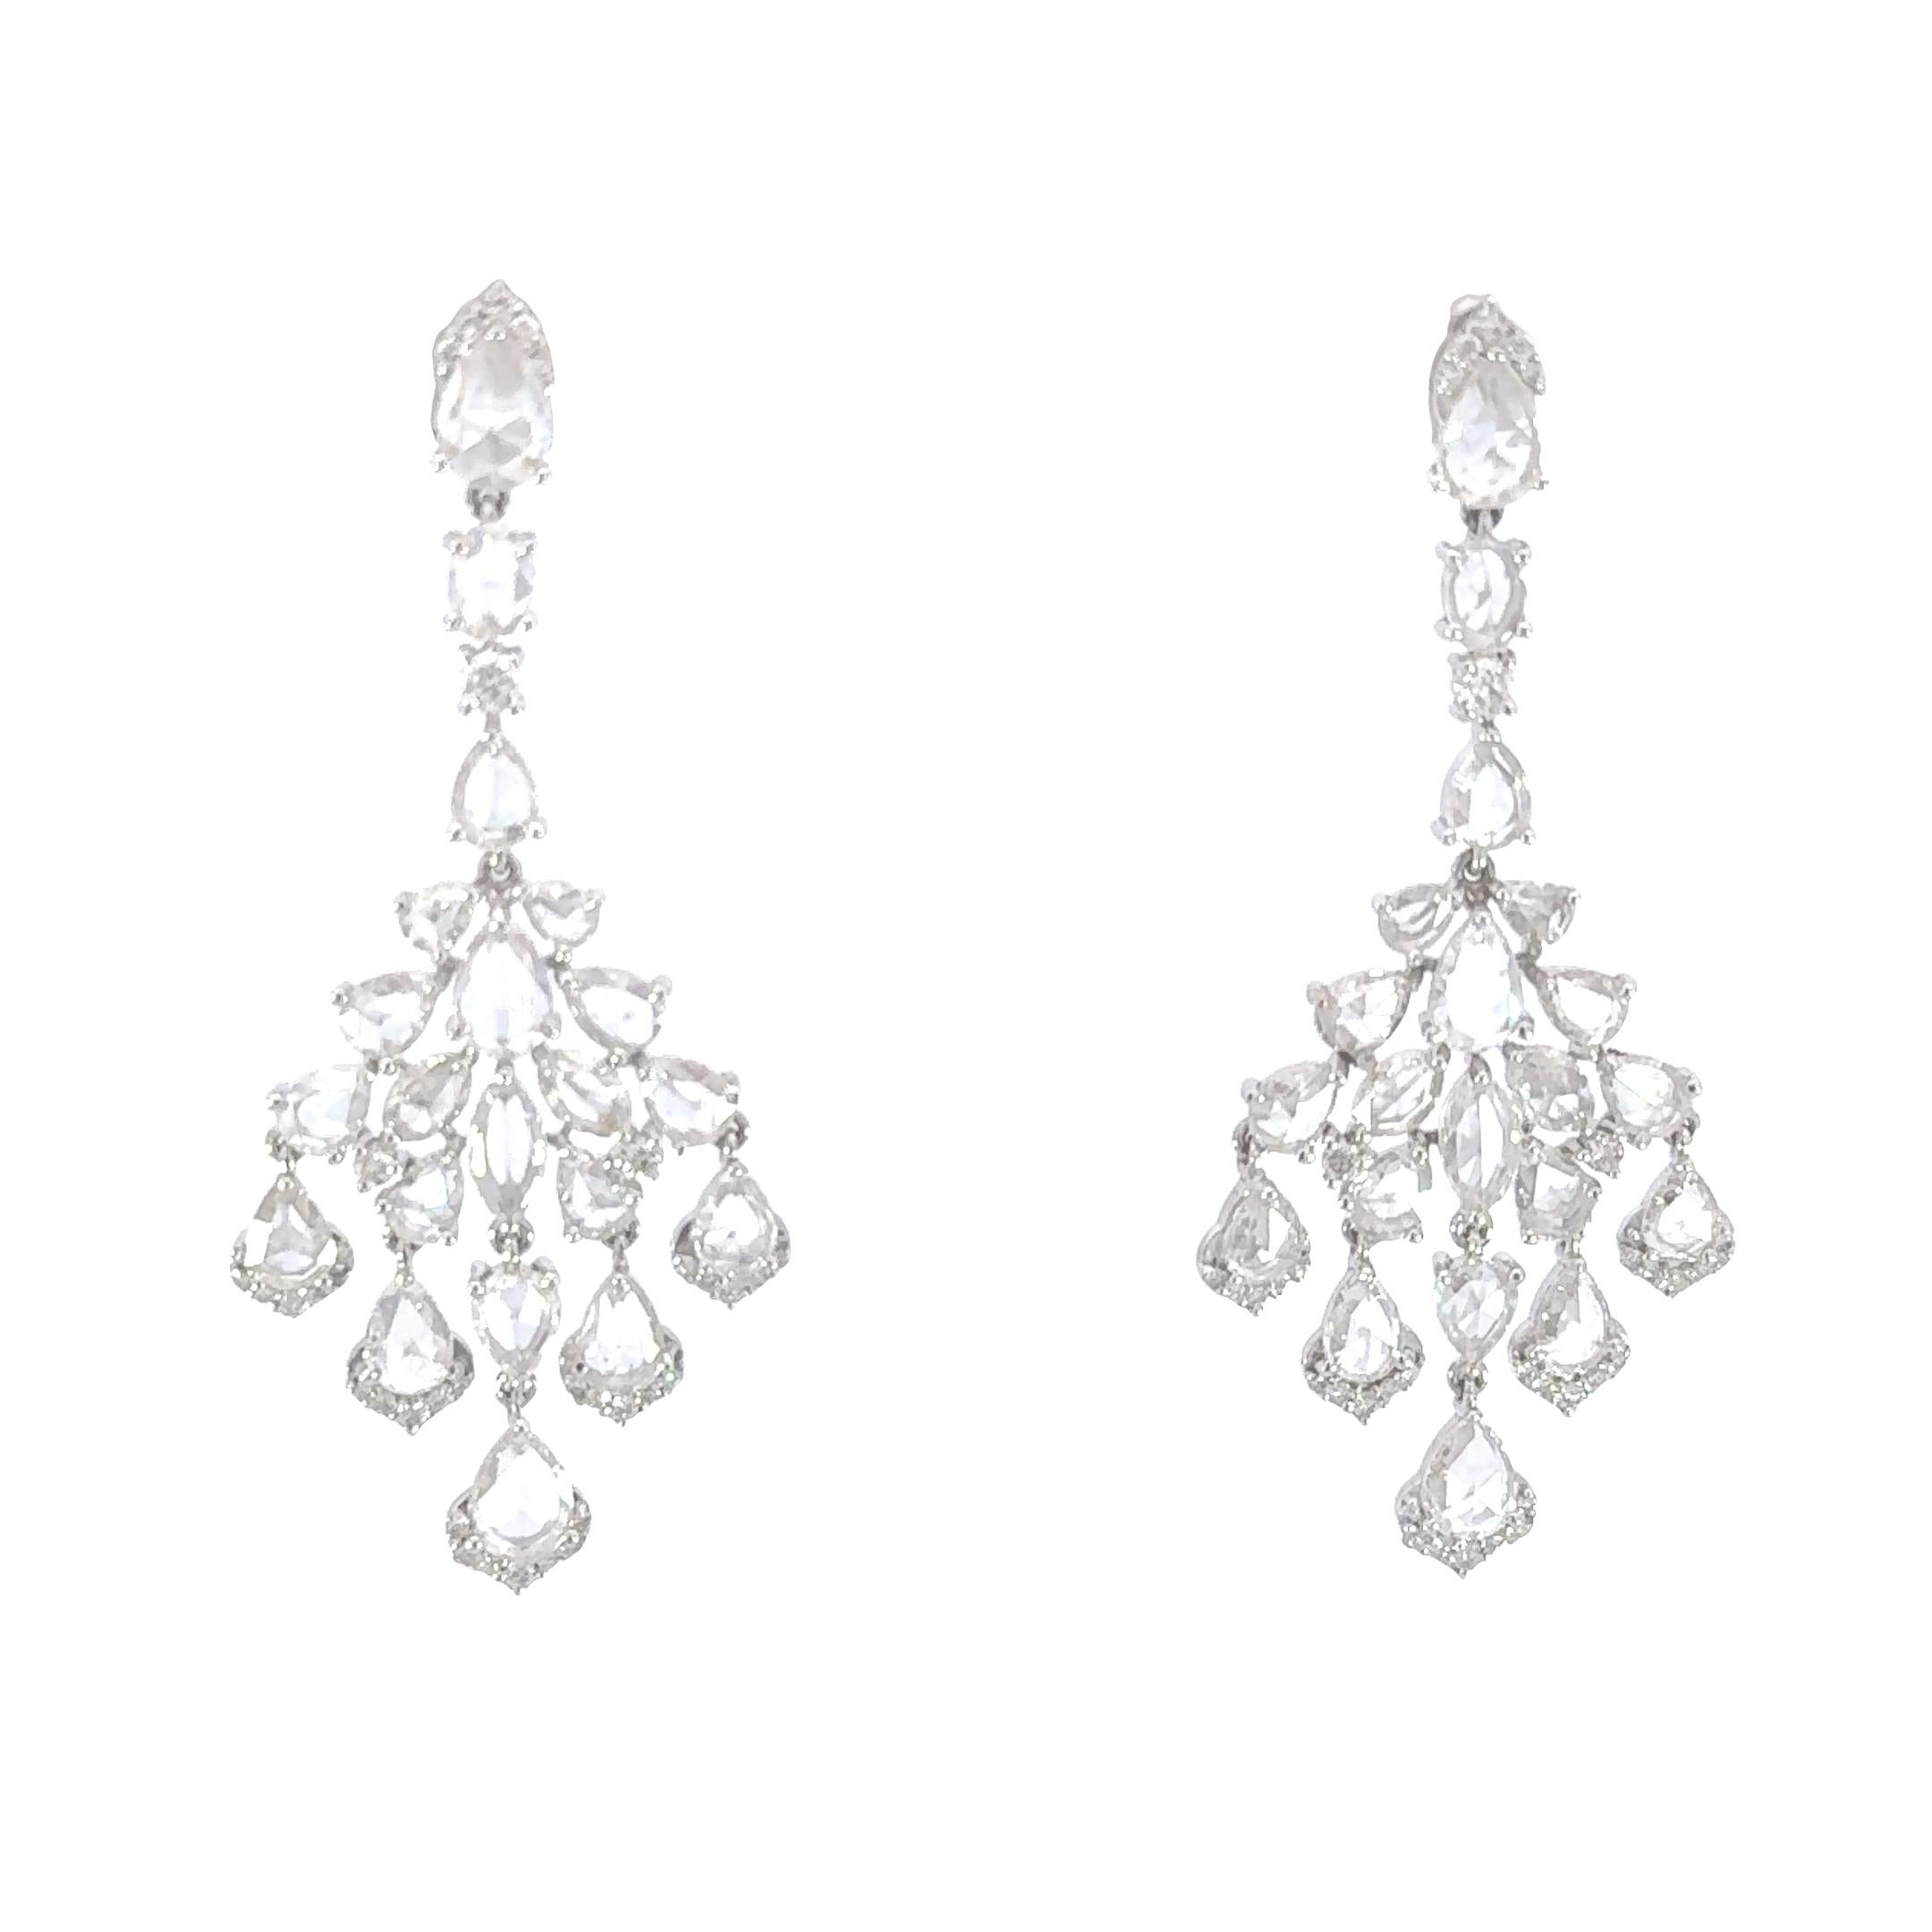 These stunning earrings exude an aura of timeless elegance, showcasing a captivating combination of rose cut diamonds cascading down with a brilliant round diamond contour, all embraced in the finest 18K white gold setting. The distinctive design